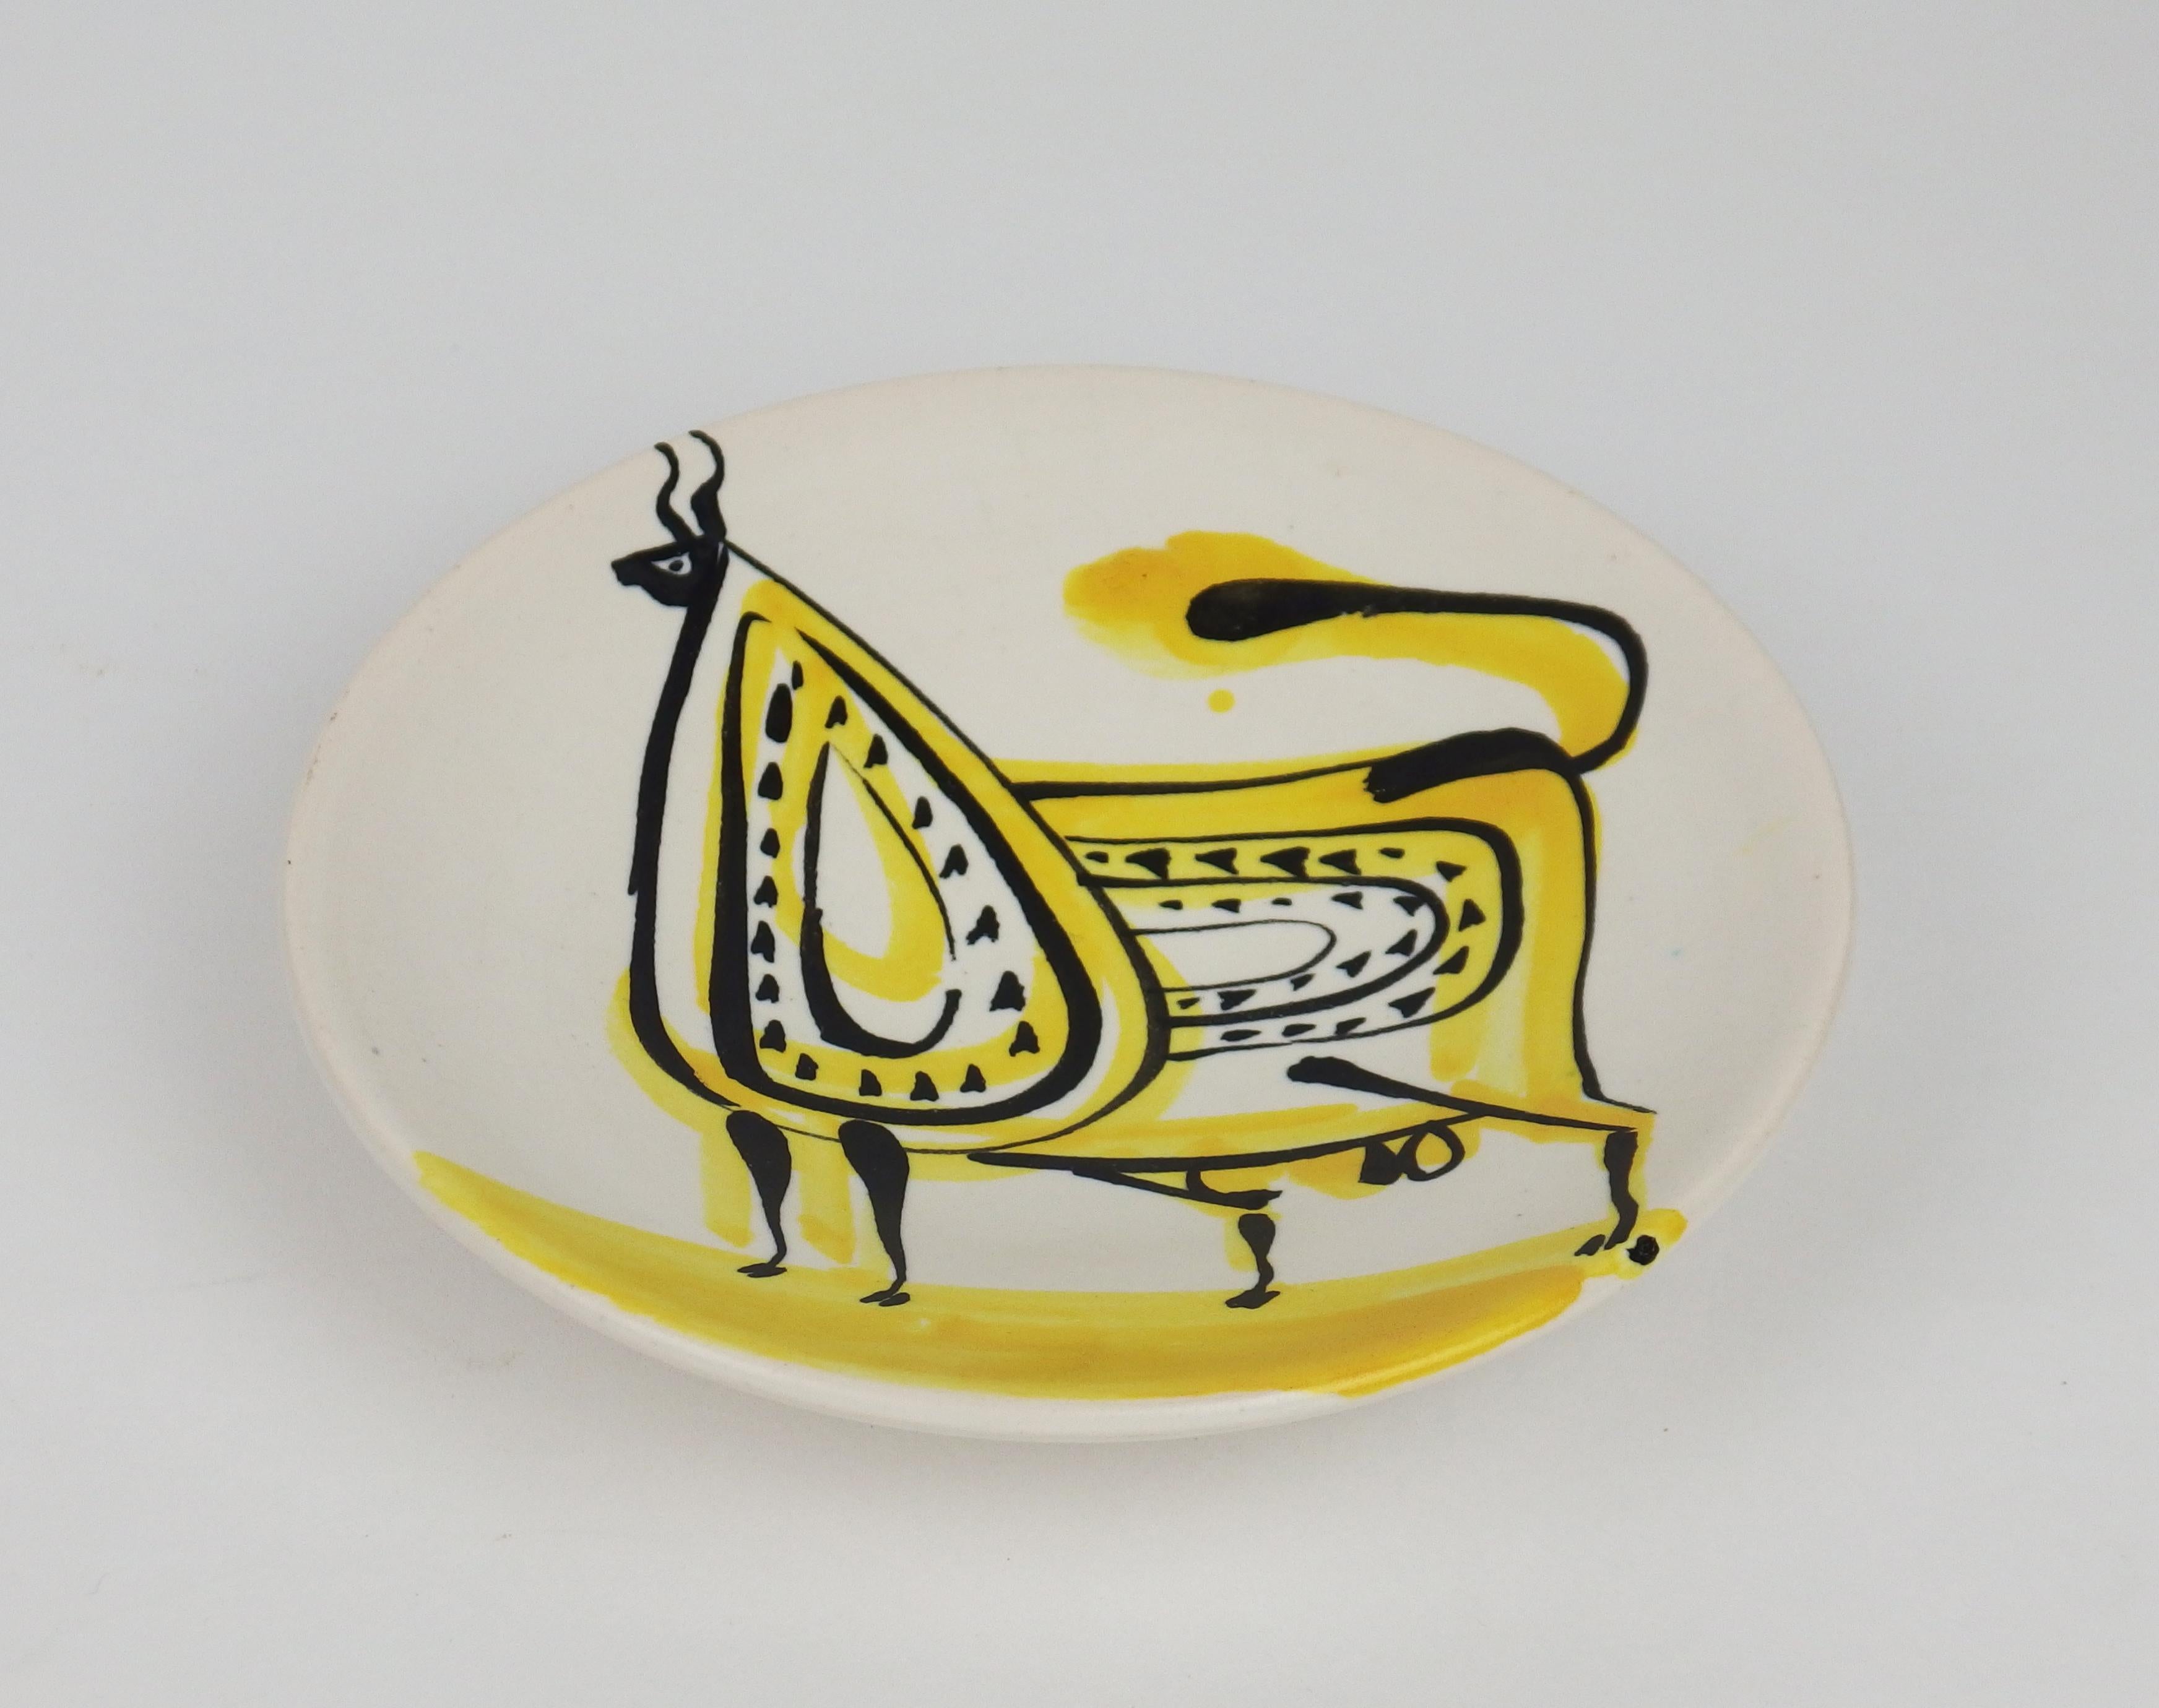 An tin-glazed earthenware bowl with a black and yellow decoration of a stylized bull on white glaze .Signed Capron Vallauris.
Good condition. No restoration.